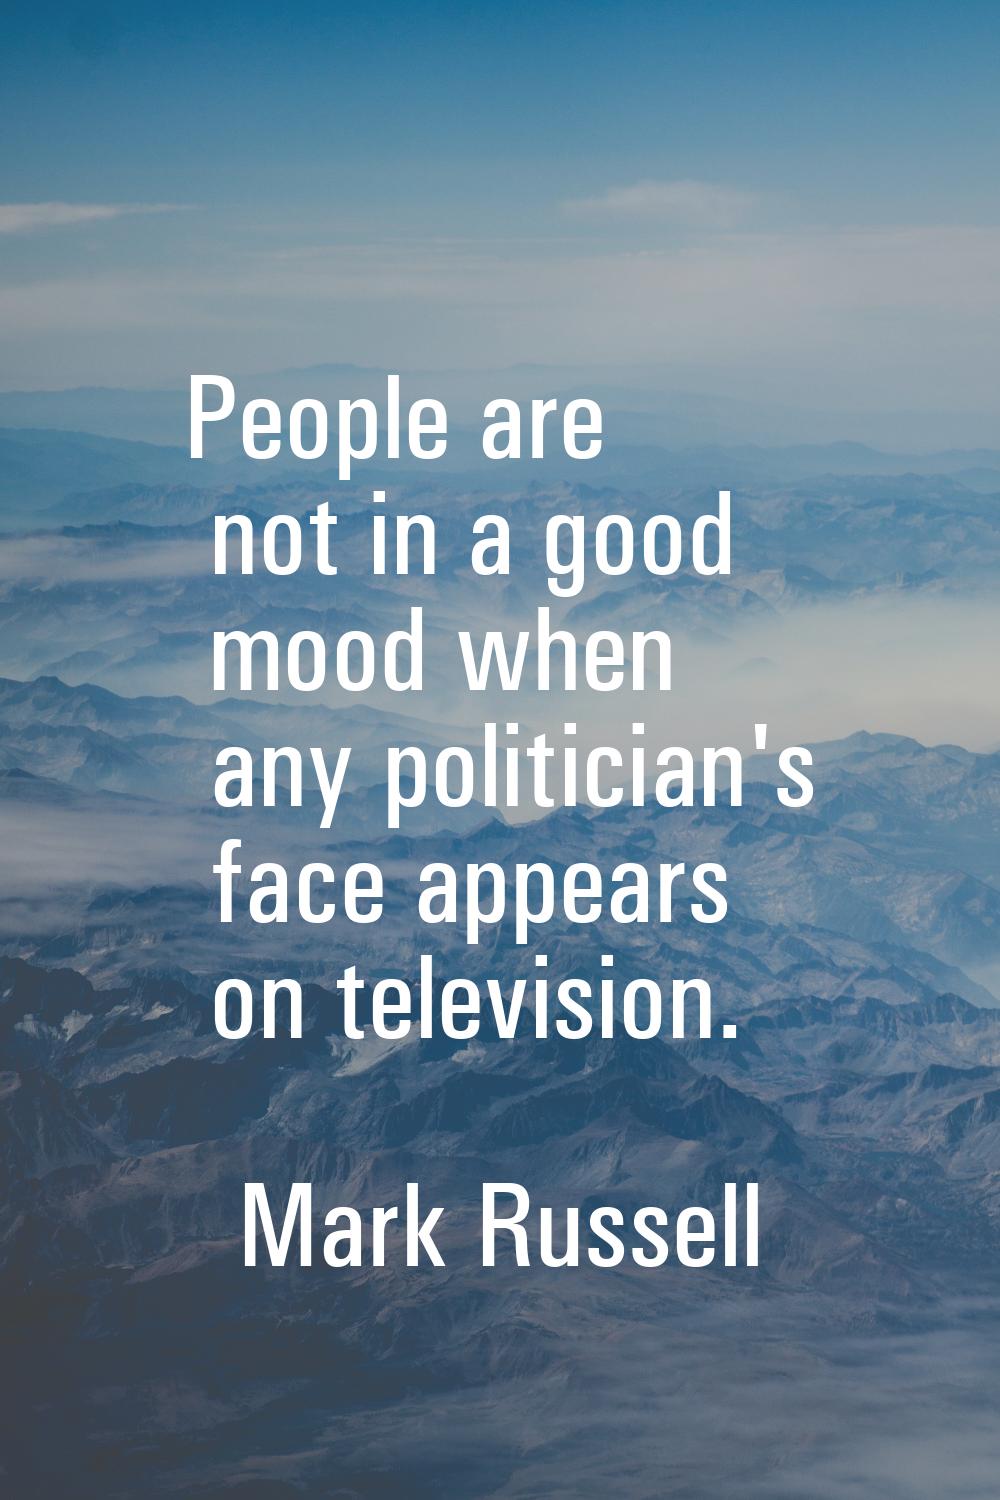 People are not in a good mood when any politician's face appears on television.